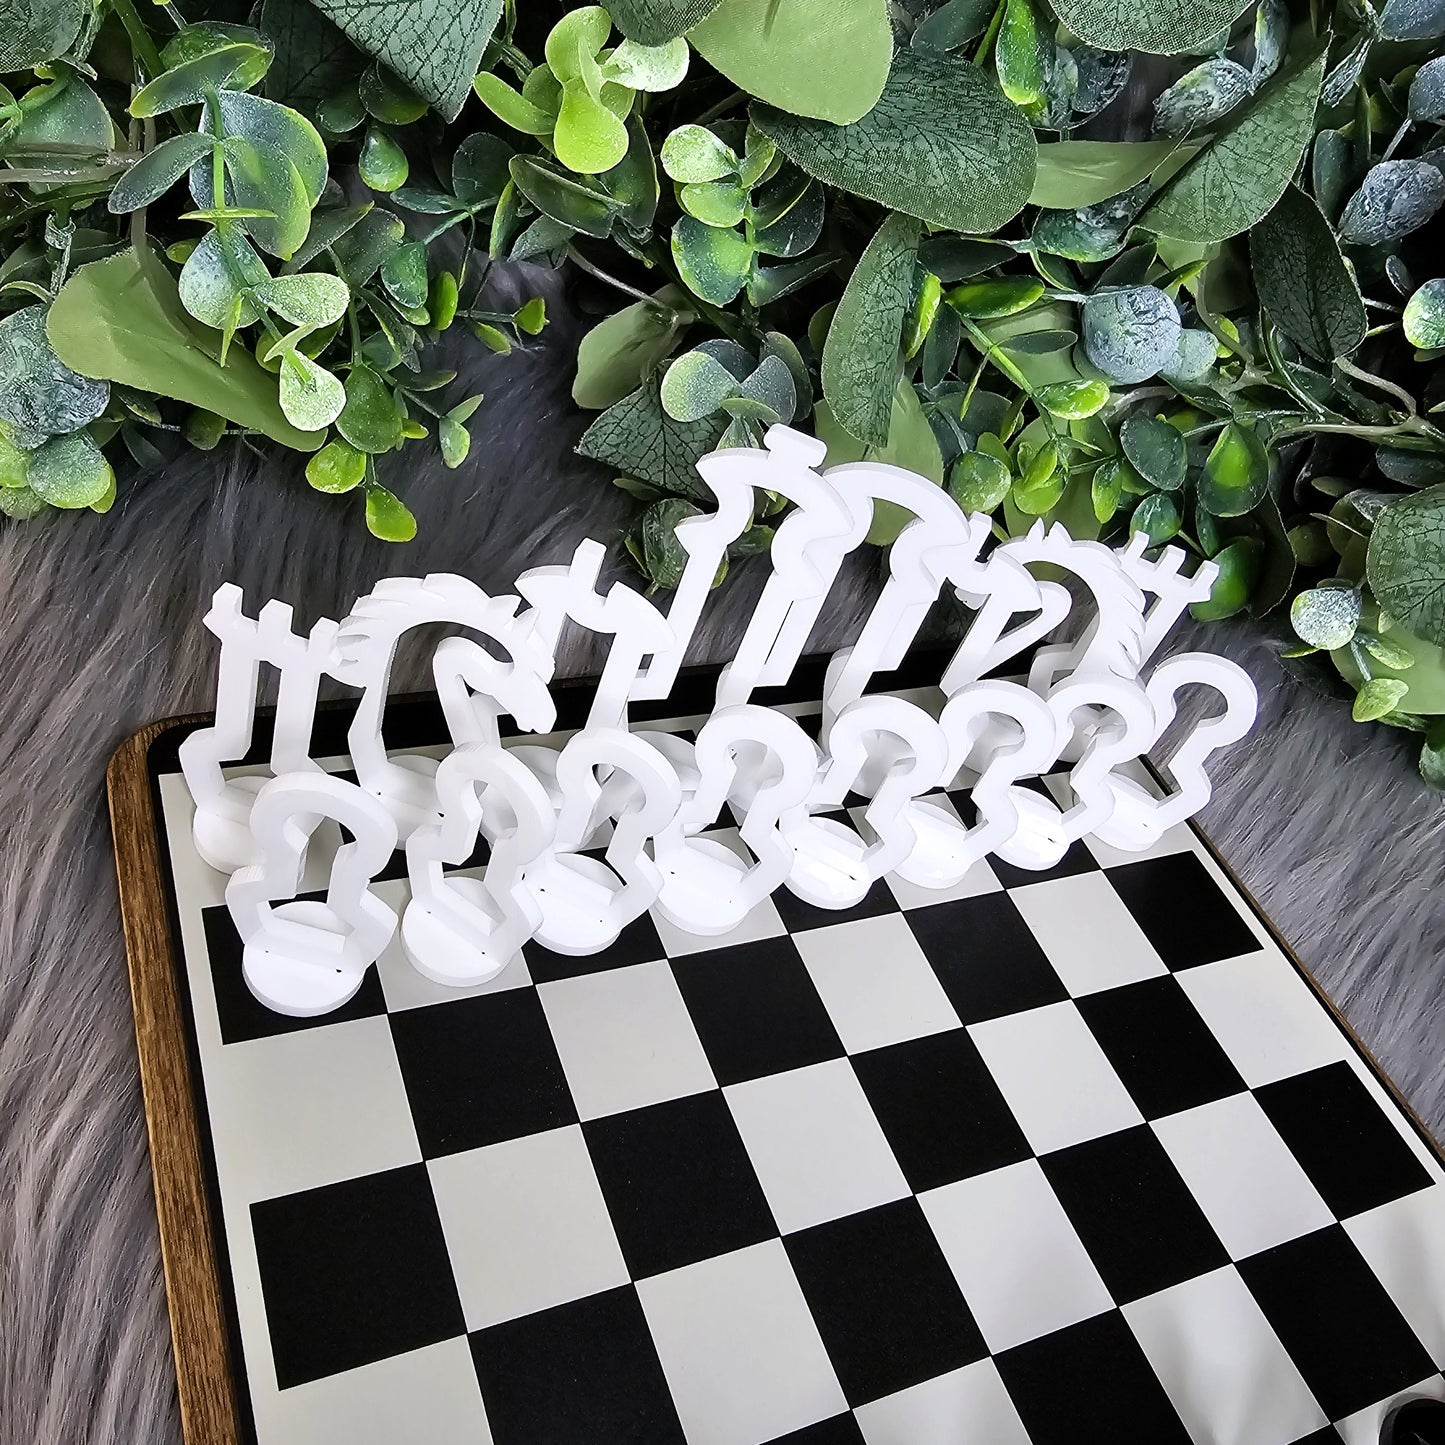 Chess Game Board